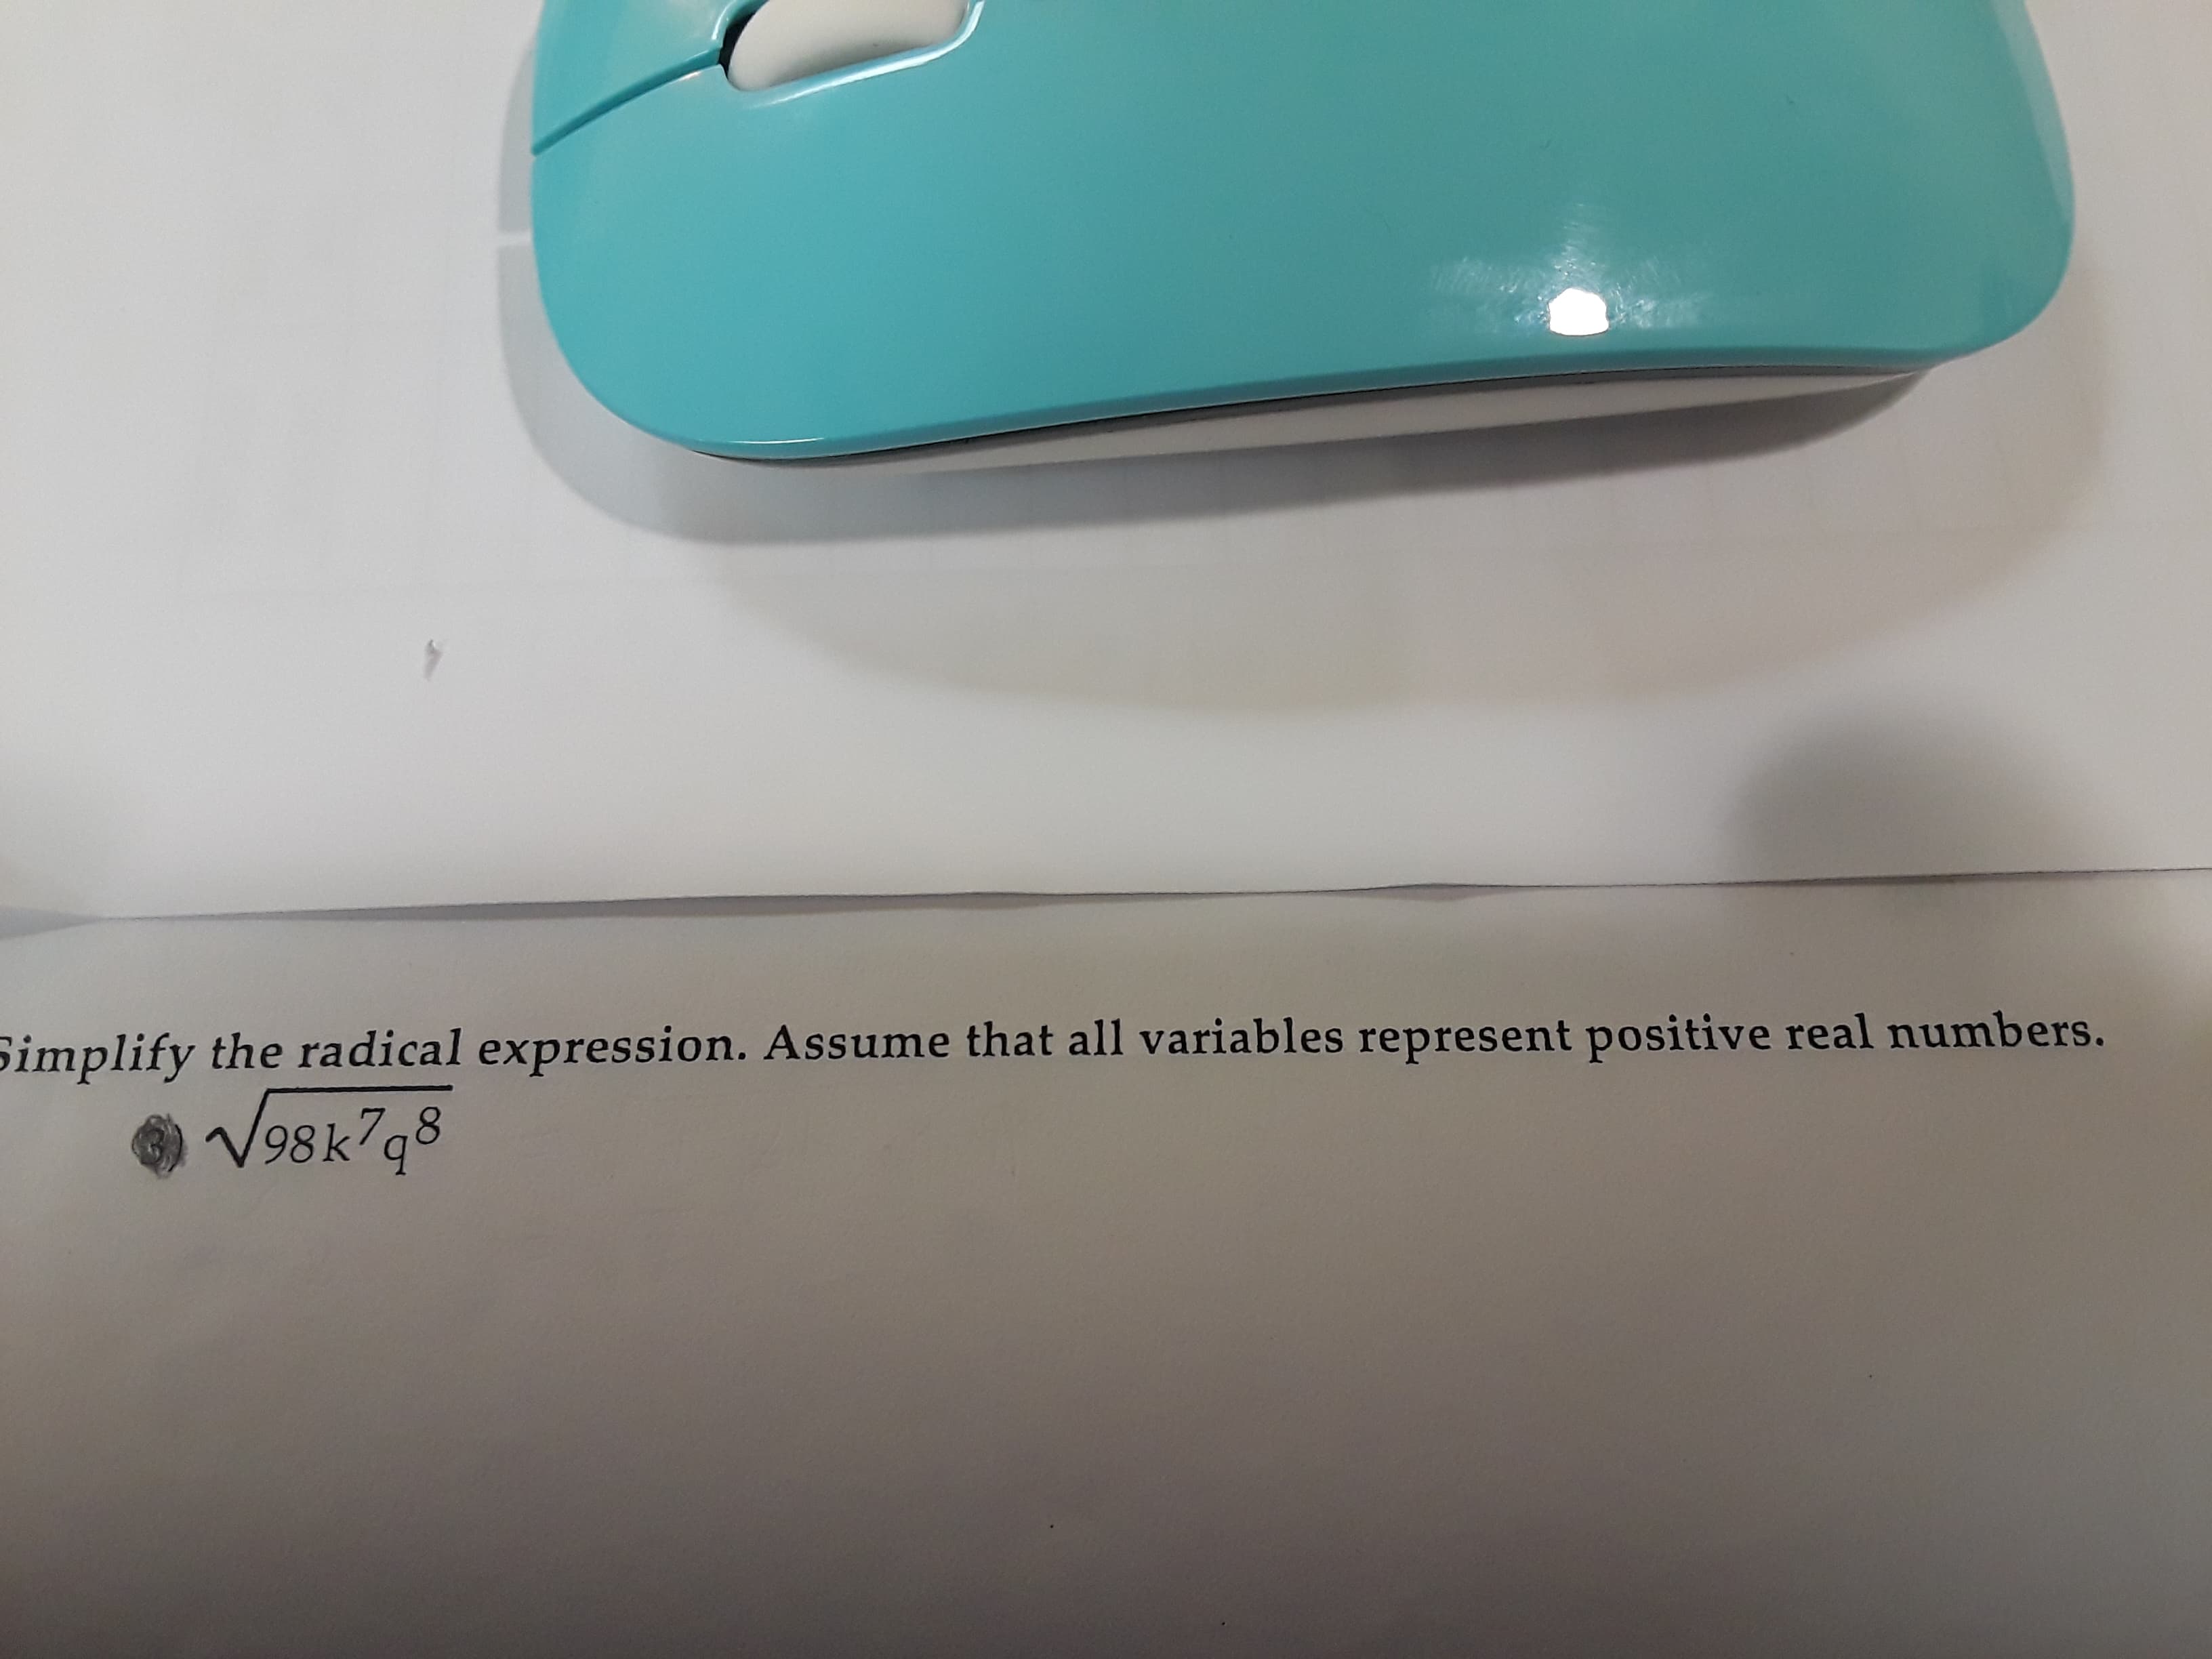 Simplify the radical expression. Assume that all variables represent positive real numbers.
V98k798
